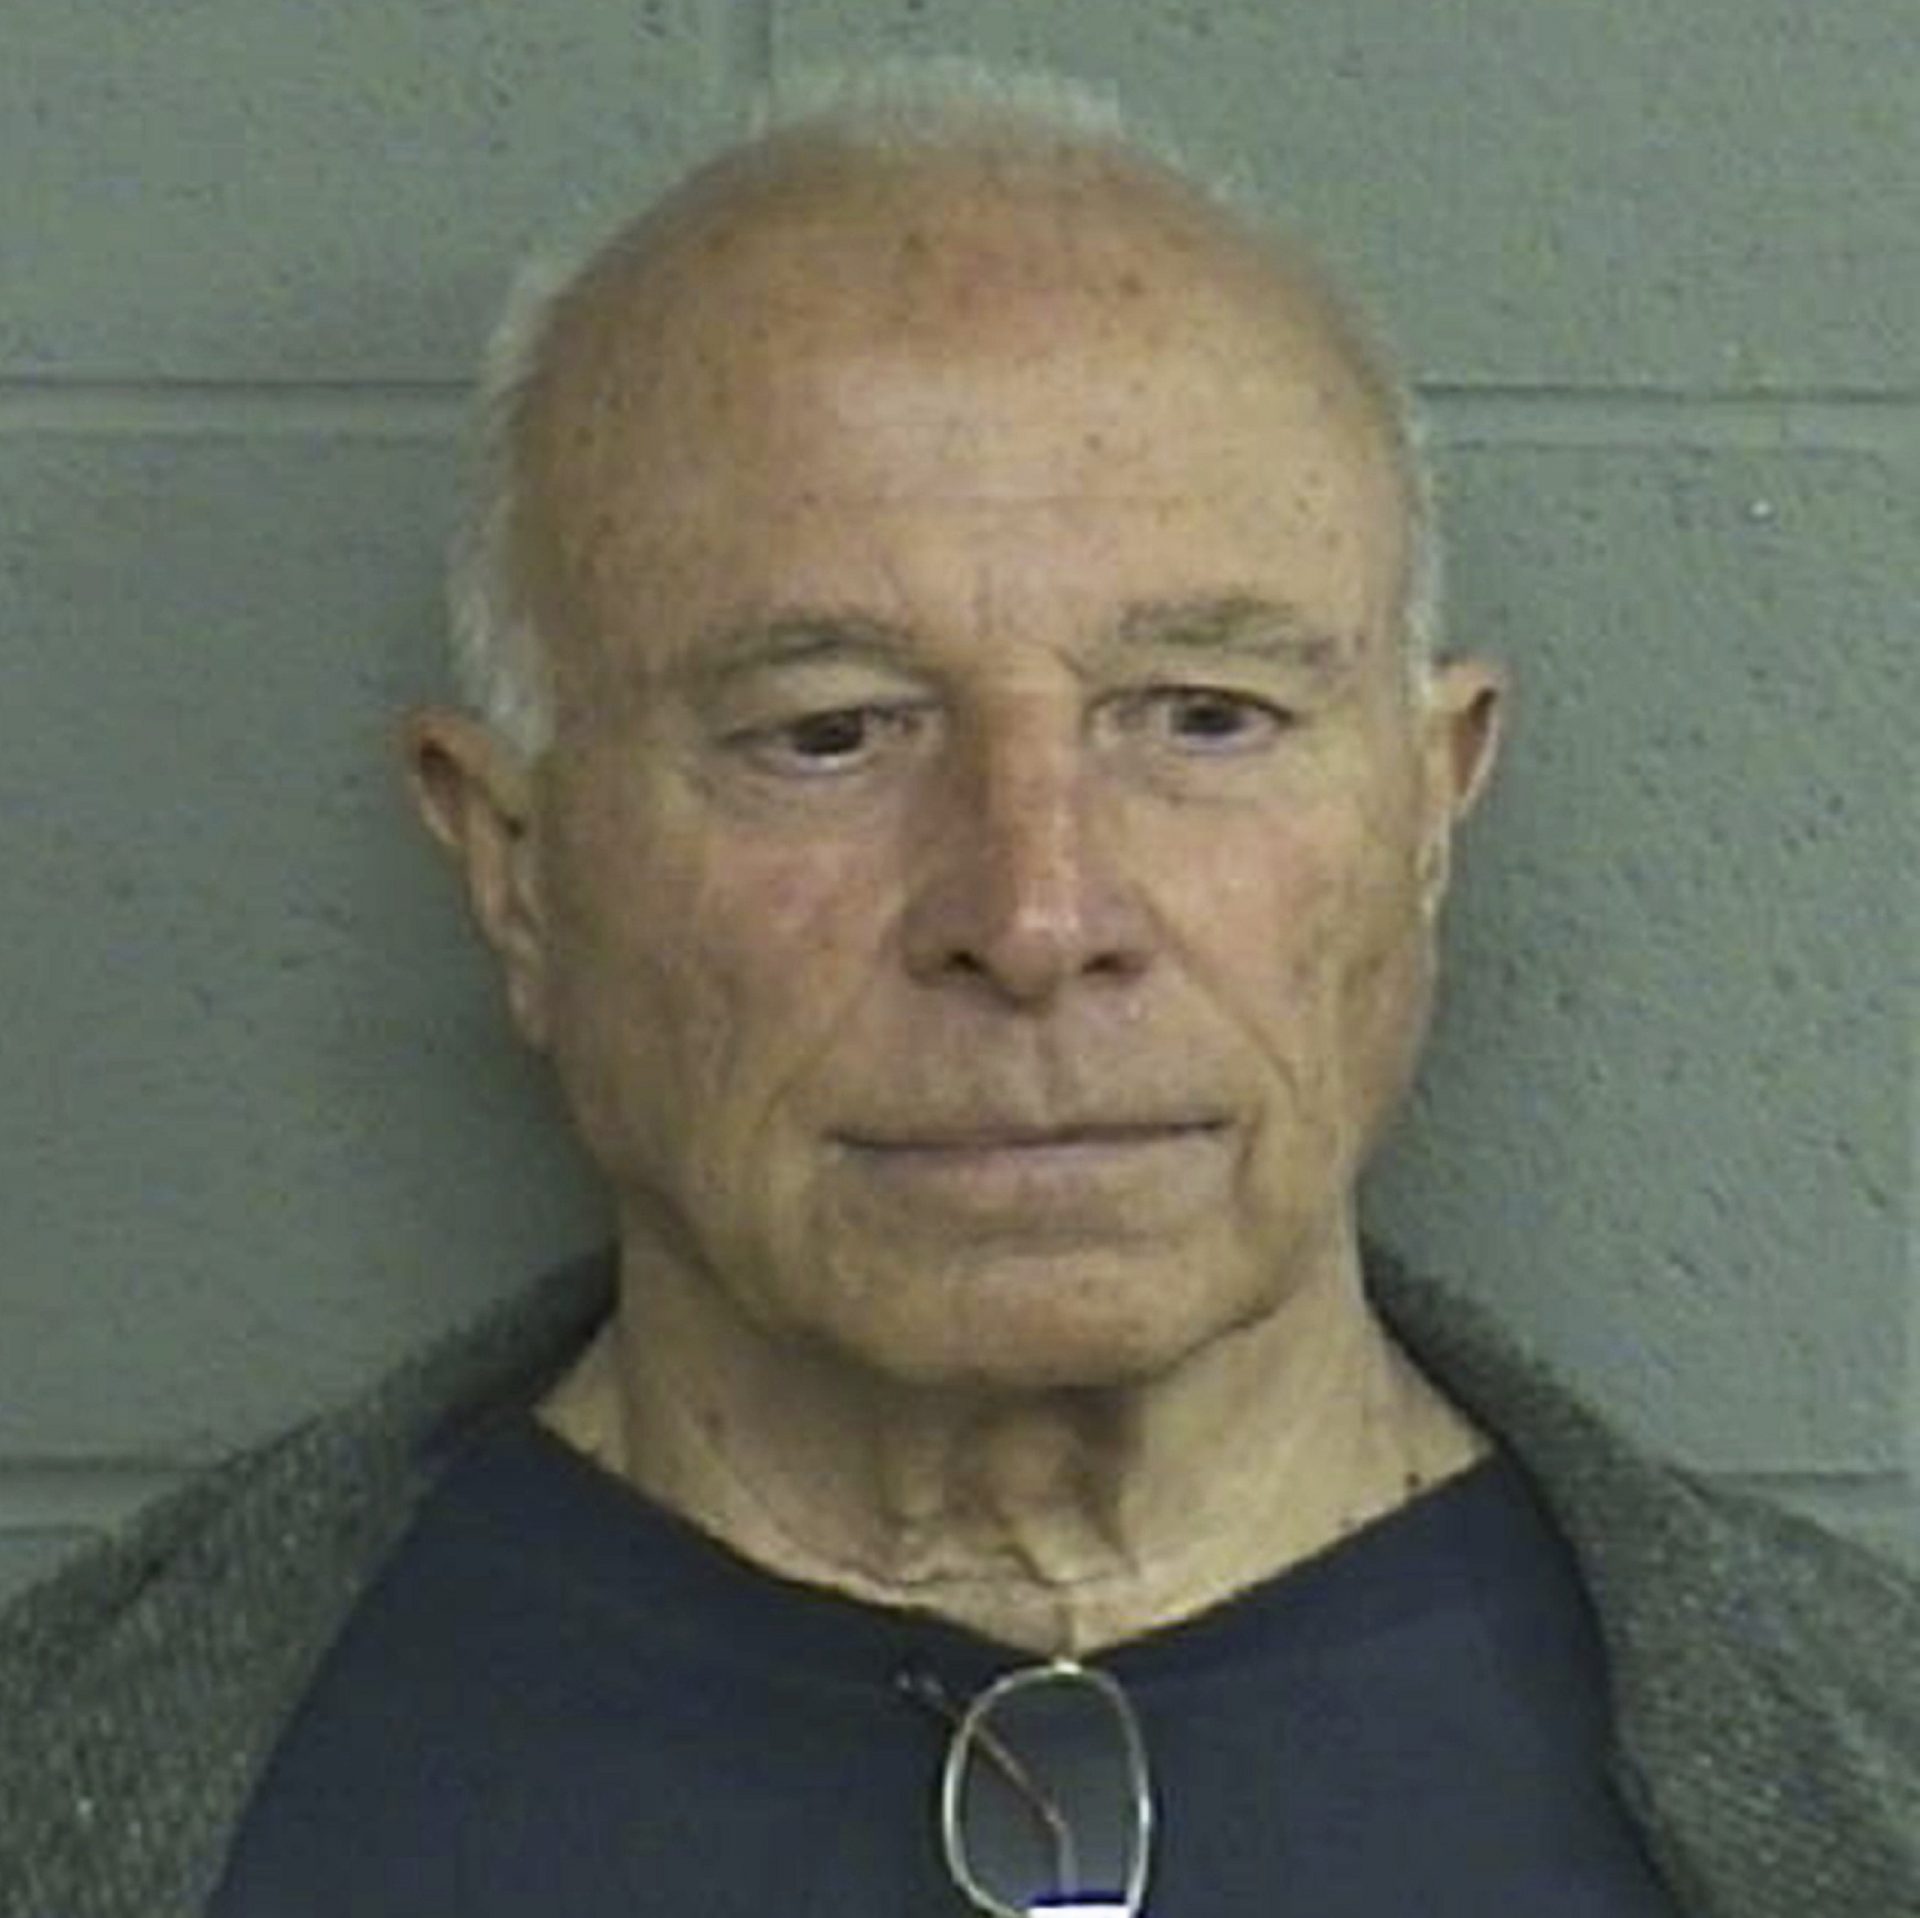 This undated photo provided by the Bonner County, Idaho Sheriff's office in September 2019 shows Louis Ladenburger. Decades after Ladenburger was temporarily removed from the priesthood to be treated for "inappropriate professional behavior and relationships," he was hired as a counselor at a school for troubled boys in Idaho. He was arrested in 2007 and accused of sexual battery; in a deal with prosecutors, he pleaded guilty to aggravated assault. He served about five months in prison.